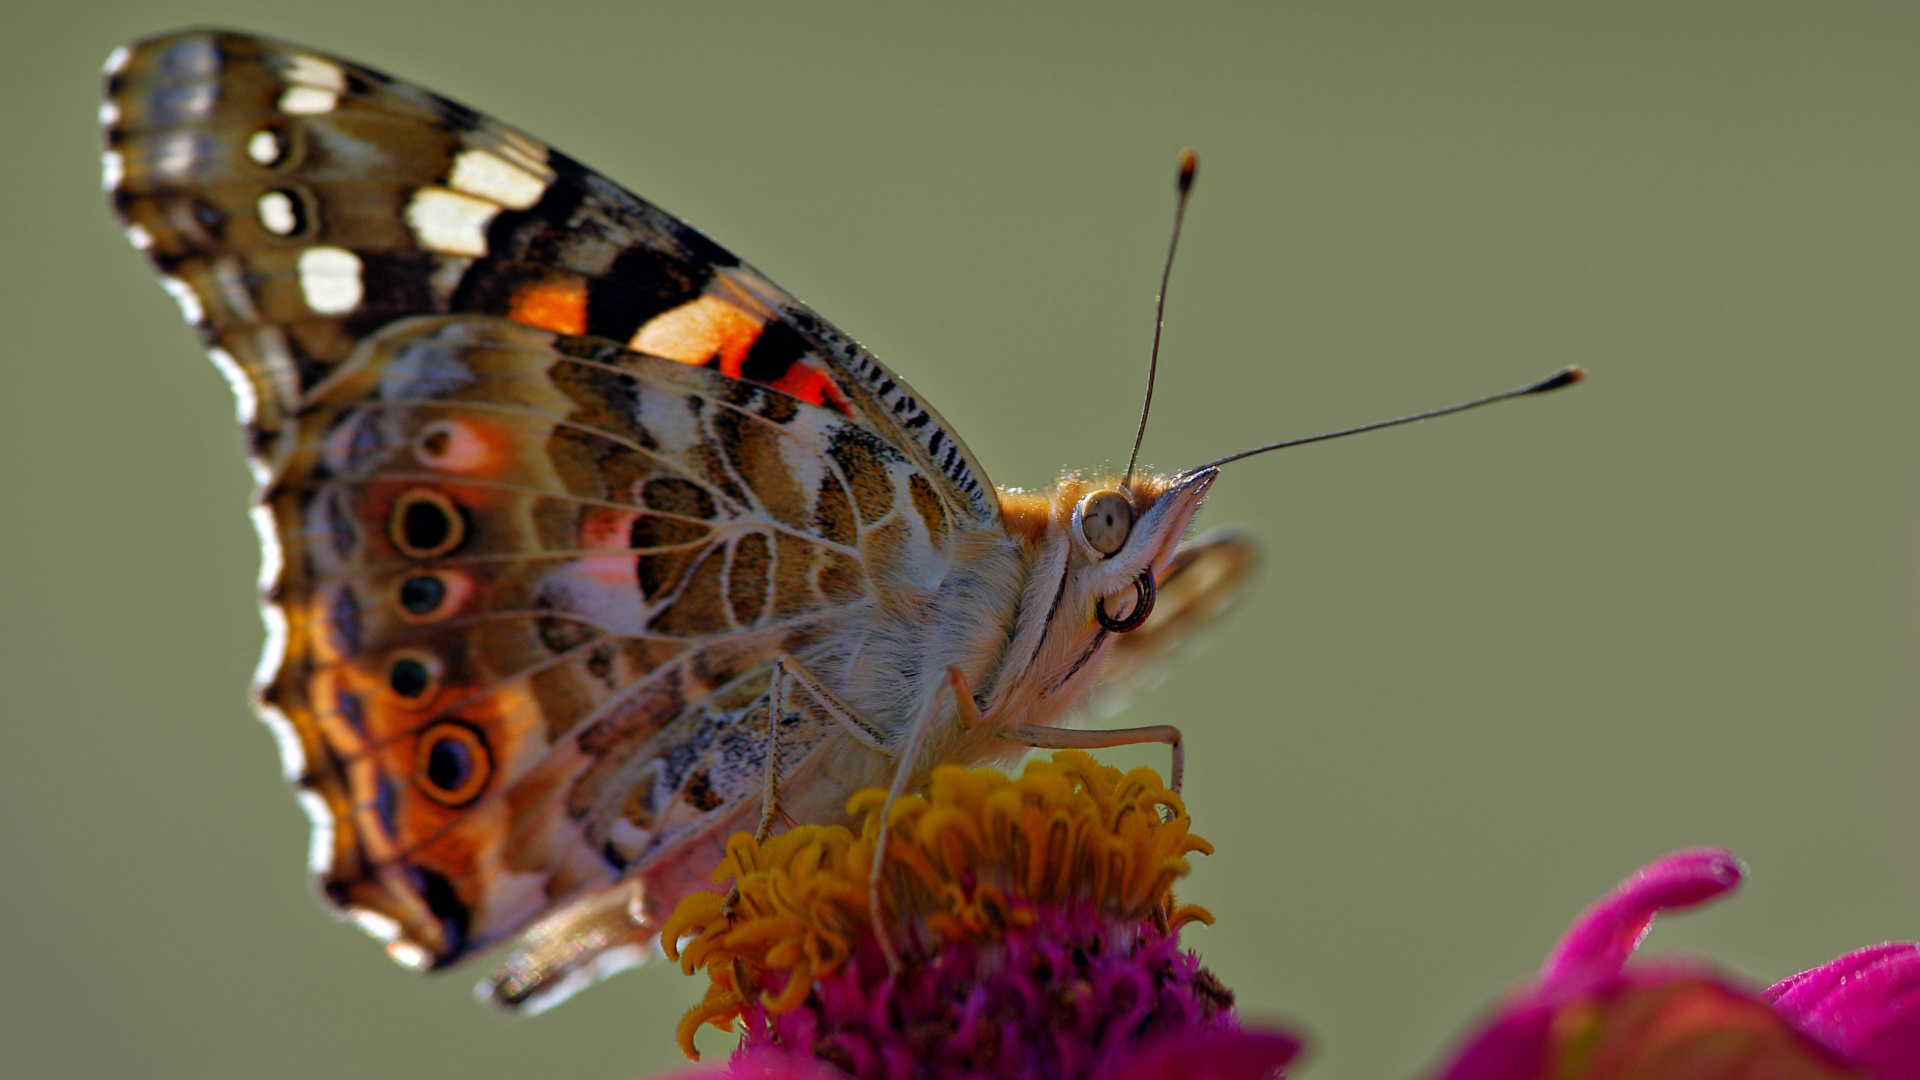 Painted Lady Butterfly Perched on Purple Flower in Close up Photography During Daytime. Wallpaper in 1920x1080 Resolution